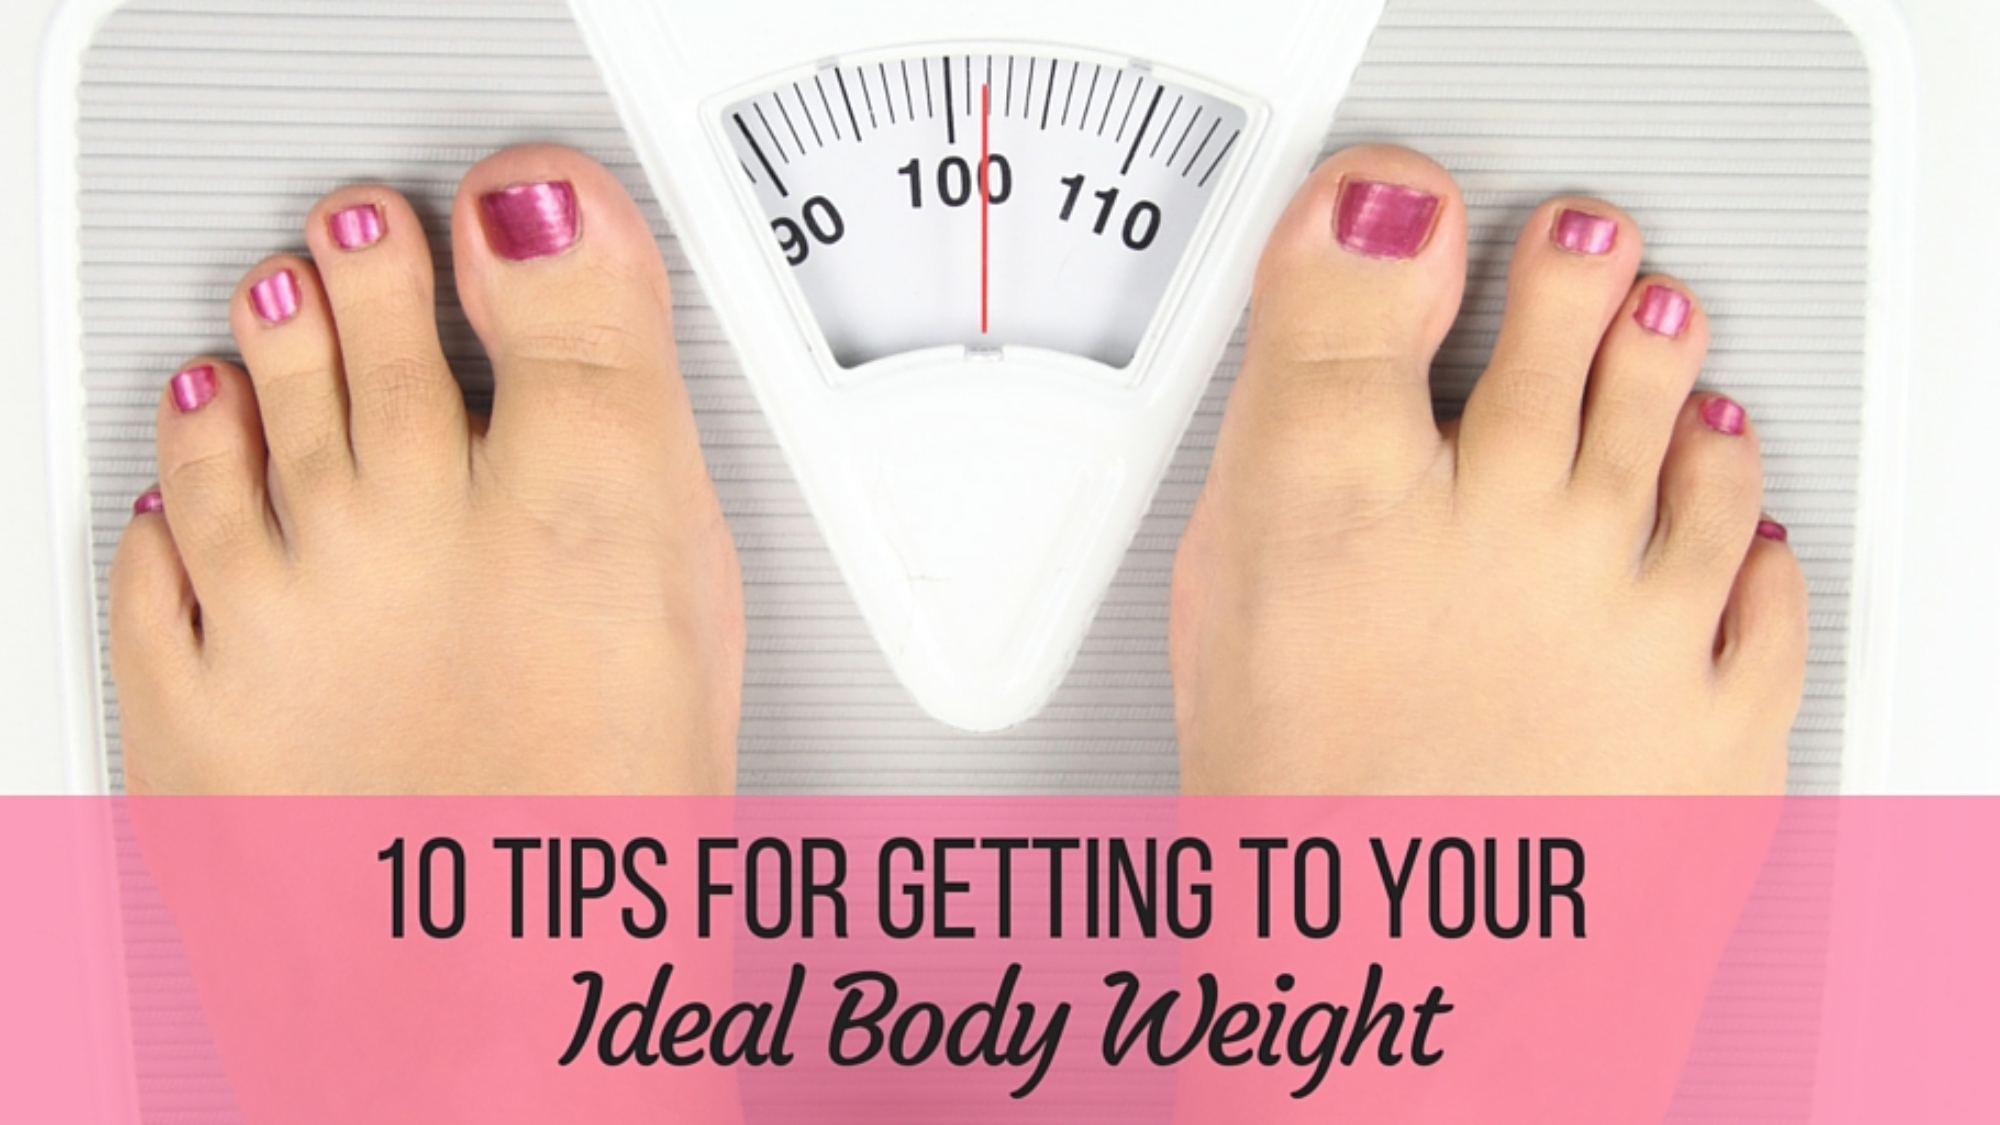 10+tips+for+getting+to+your+ideal+body+weight